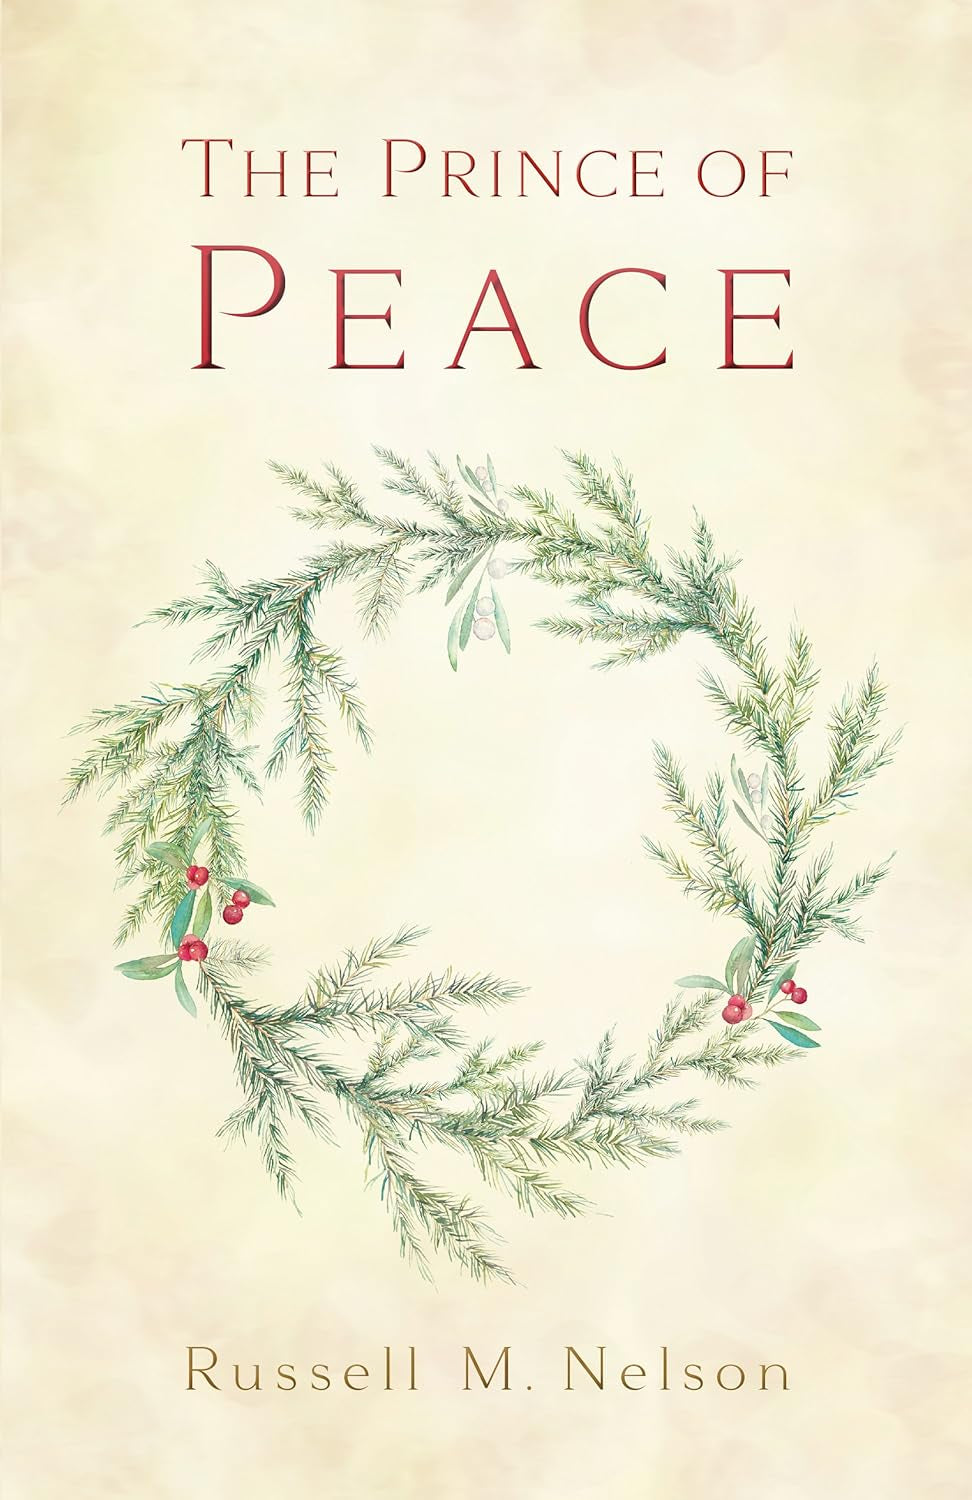 The Prince of Peace - 2016 Christmas Booklet